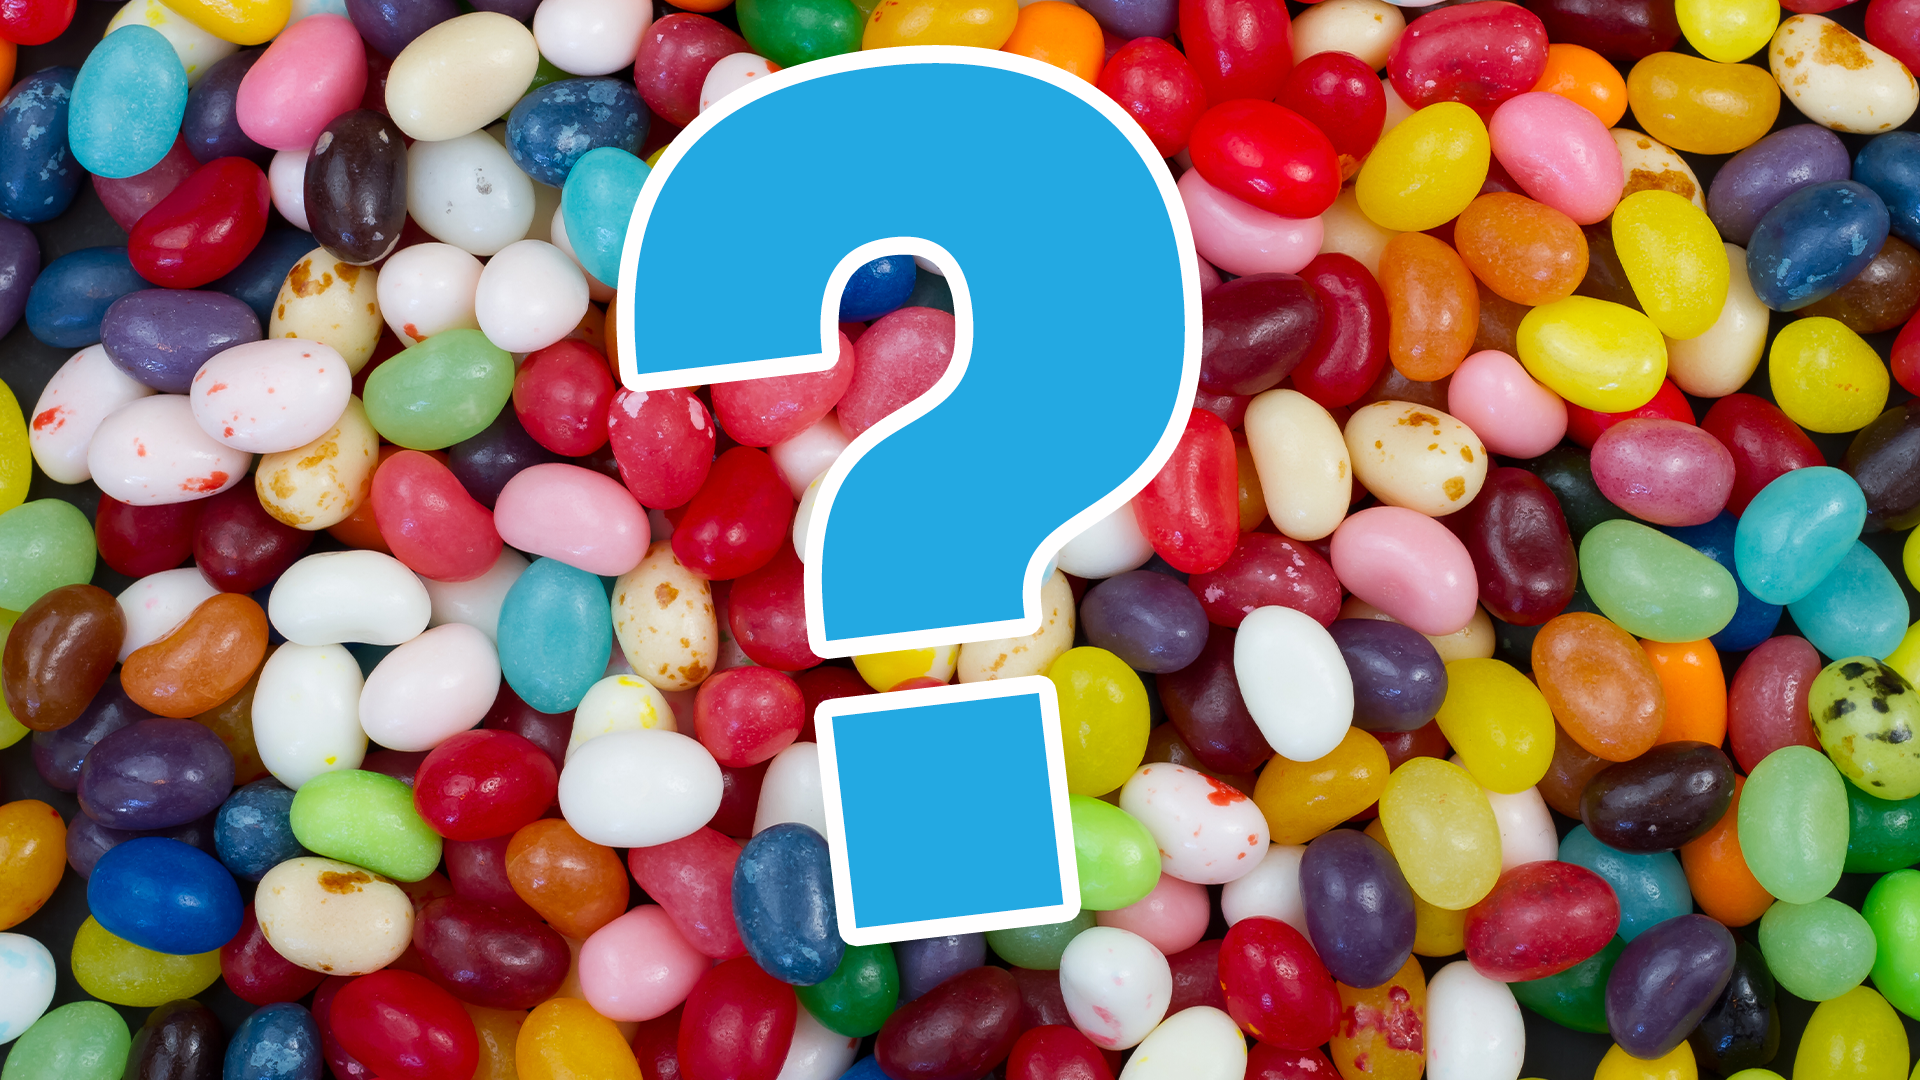 Jelly bean background and question mark